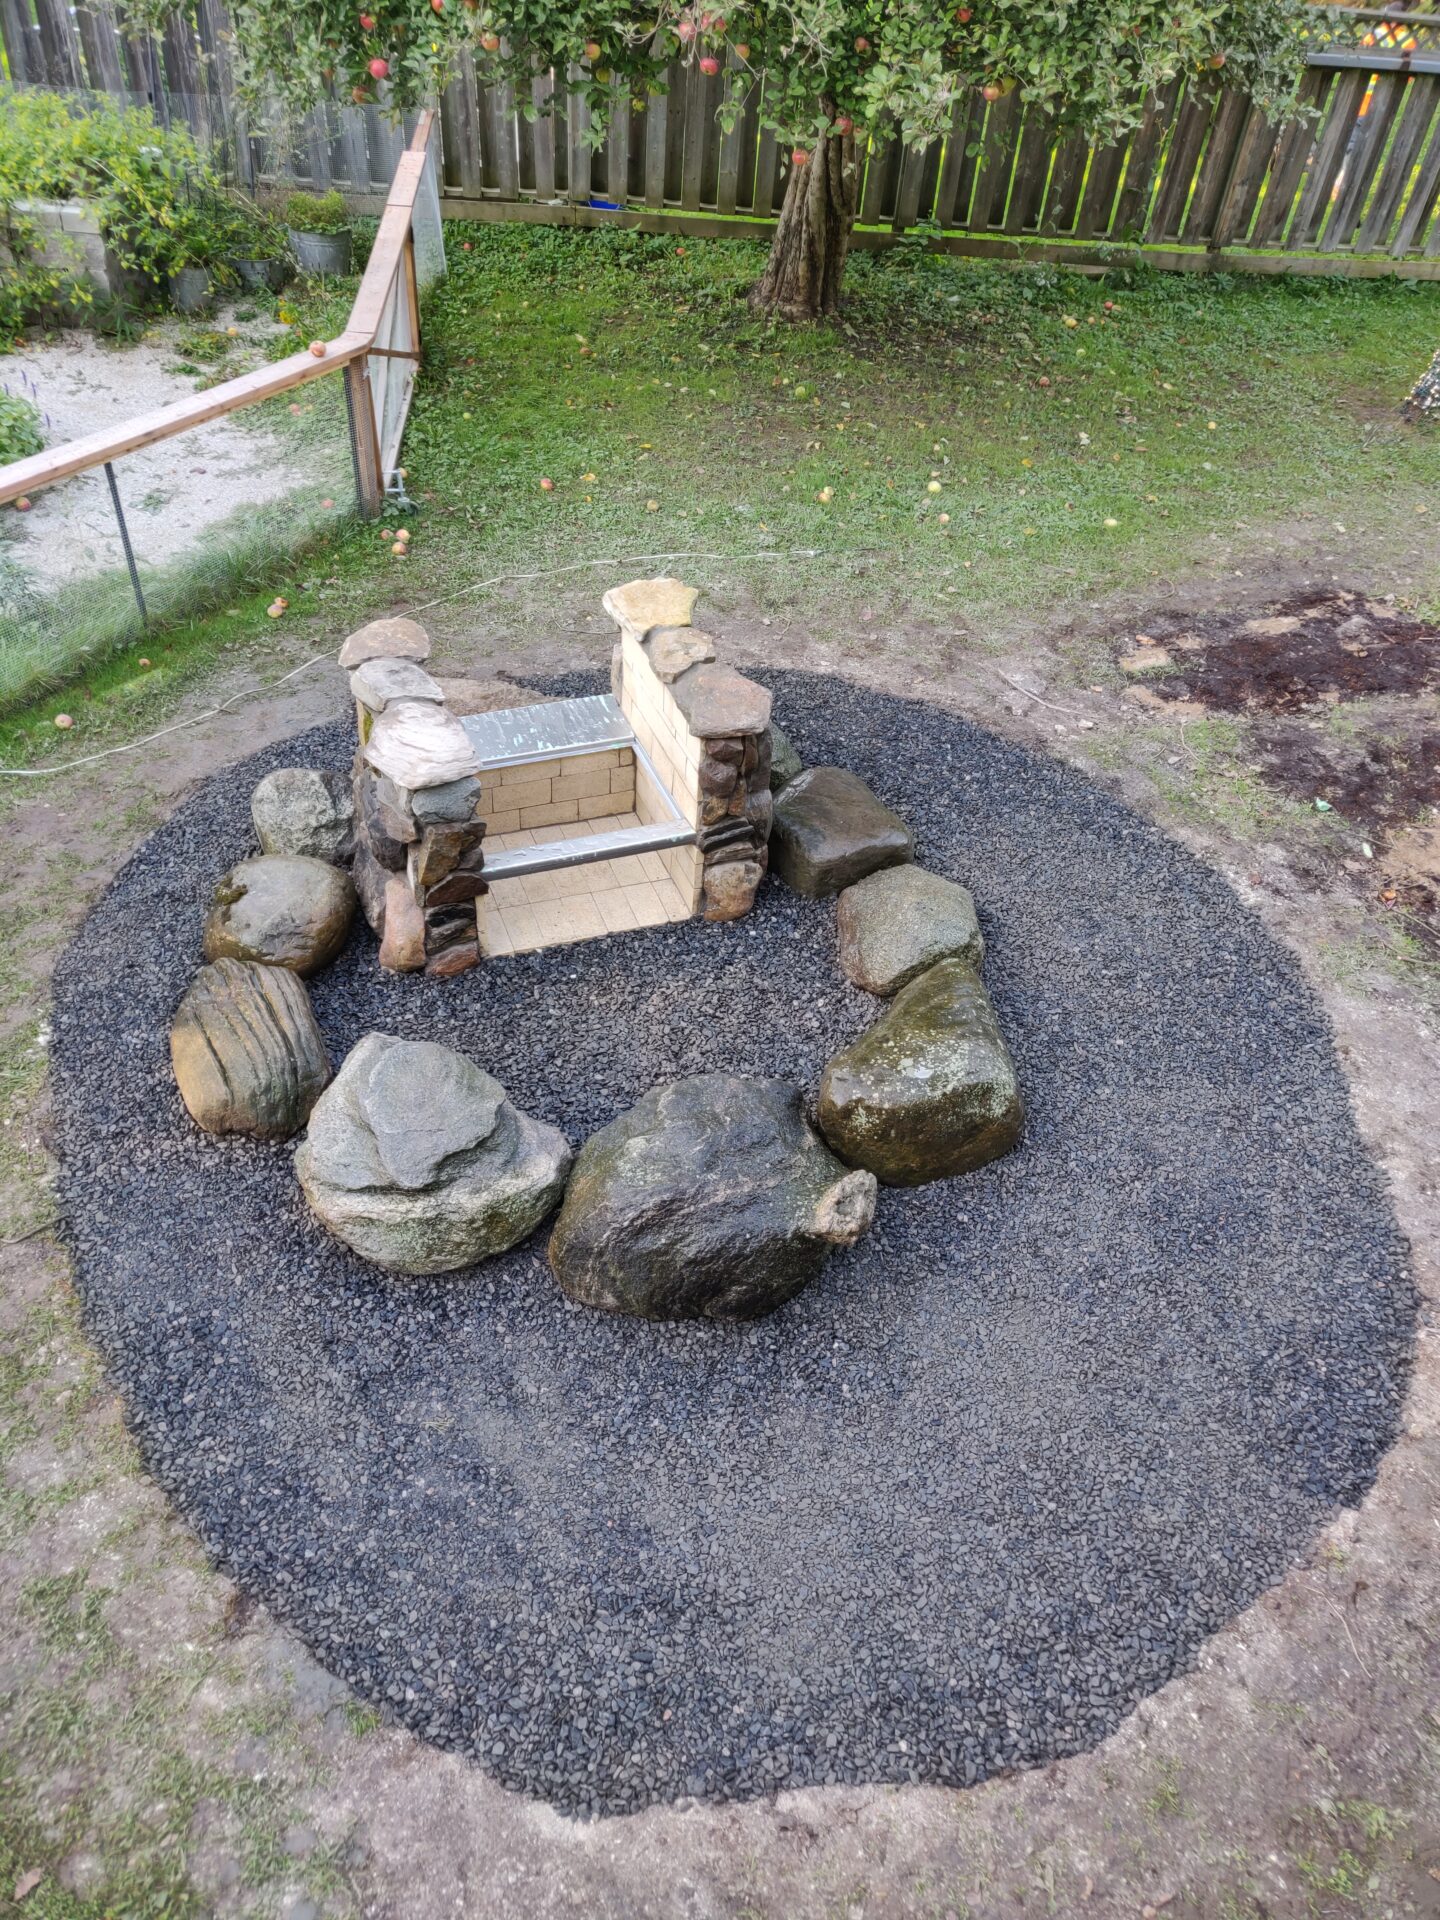 A backyard fire pit area with stone seating, surrounded by a circular gravel bed. Apples have fallen from a tree near a wooden fence.